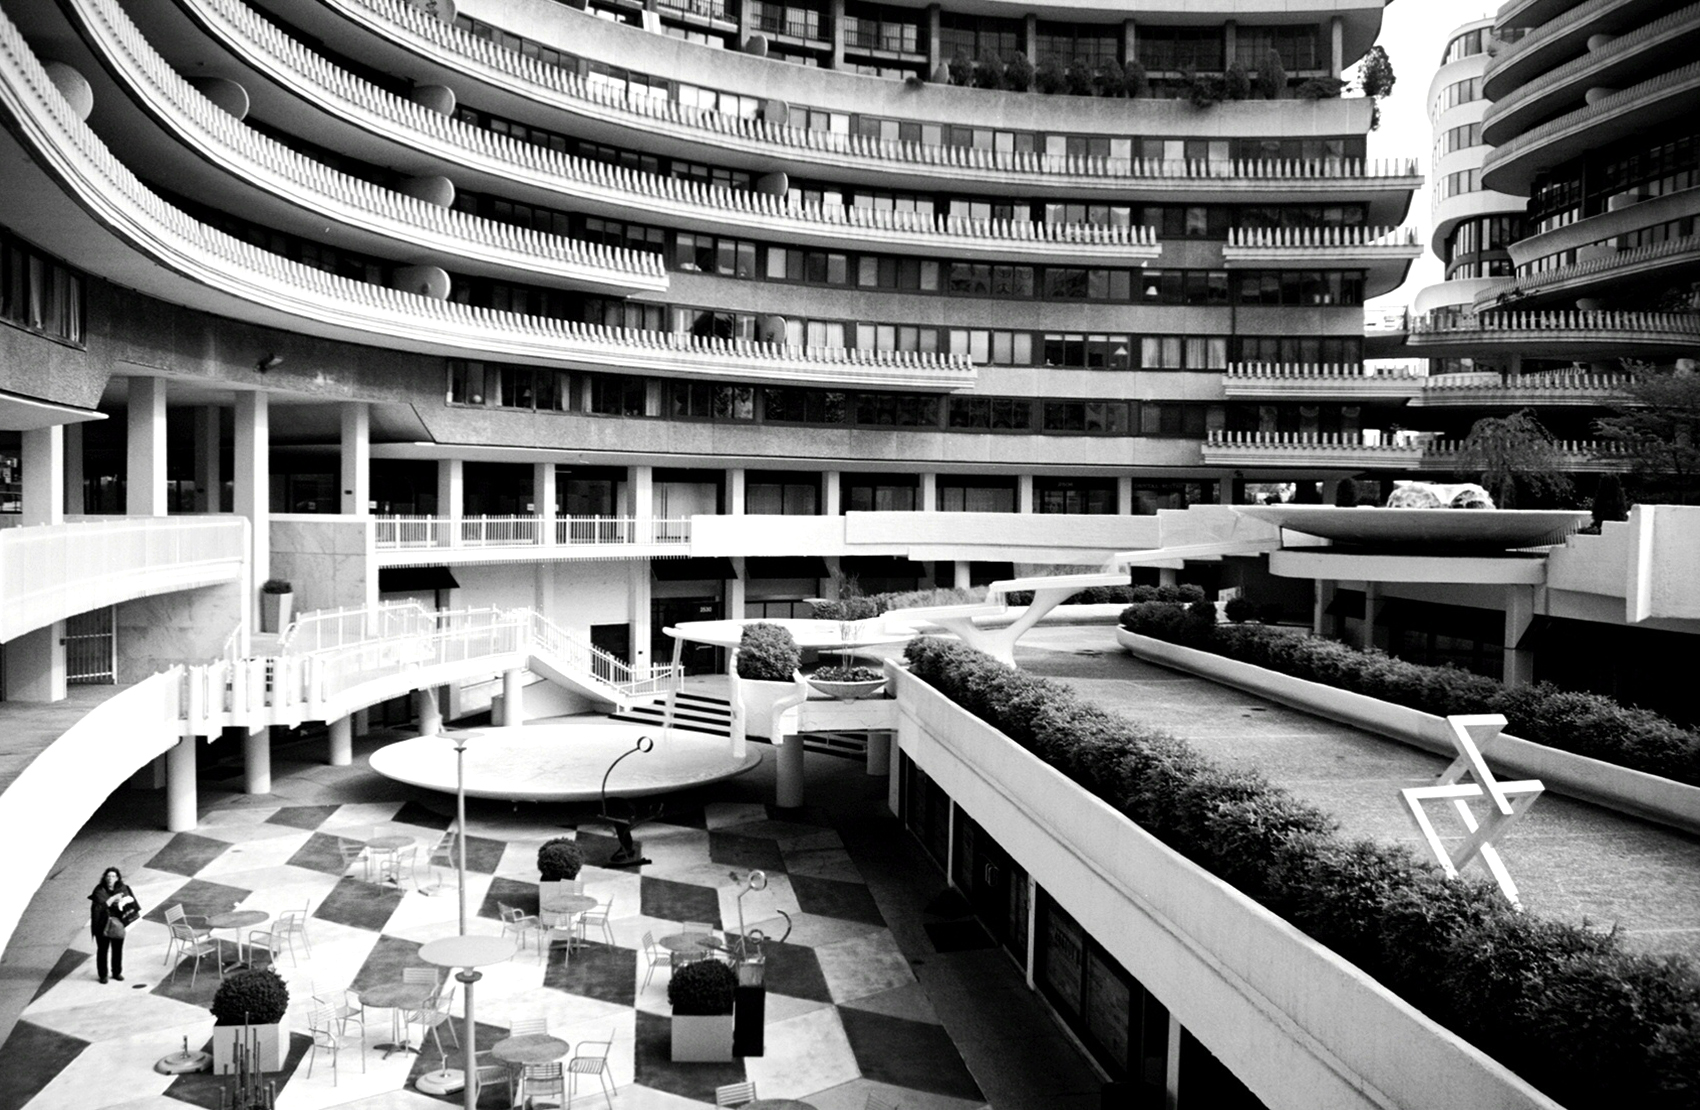 A lone pedestrian walks the lower level of the Watergate | © Deane Madsen